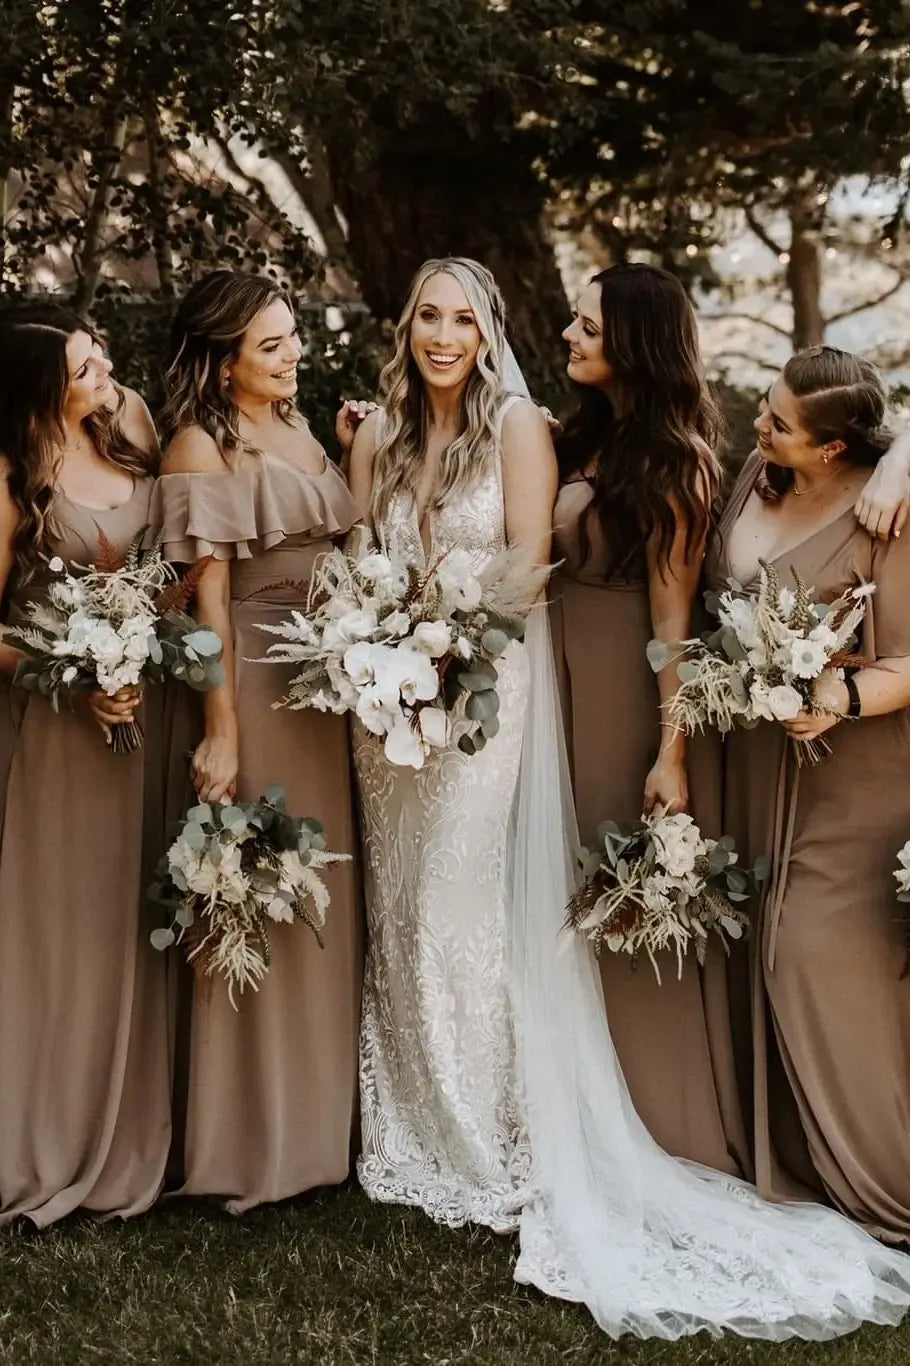 Personalize Your Bridal Party Style: Mix and Match Bridesmaid Dresses